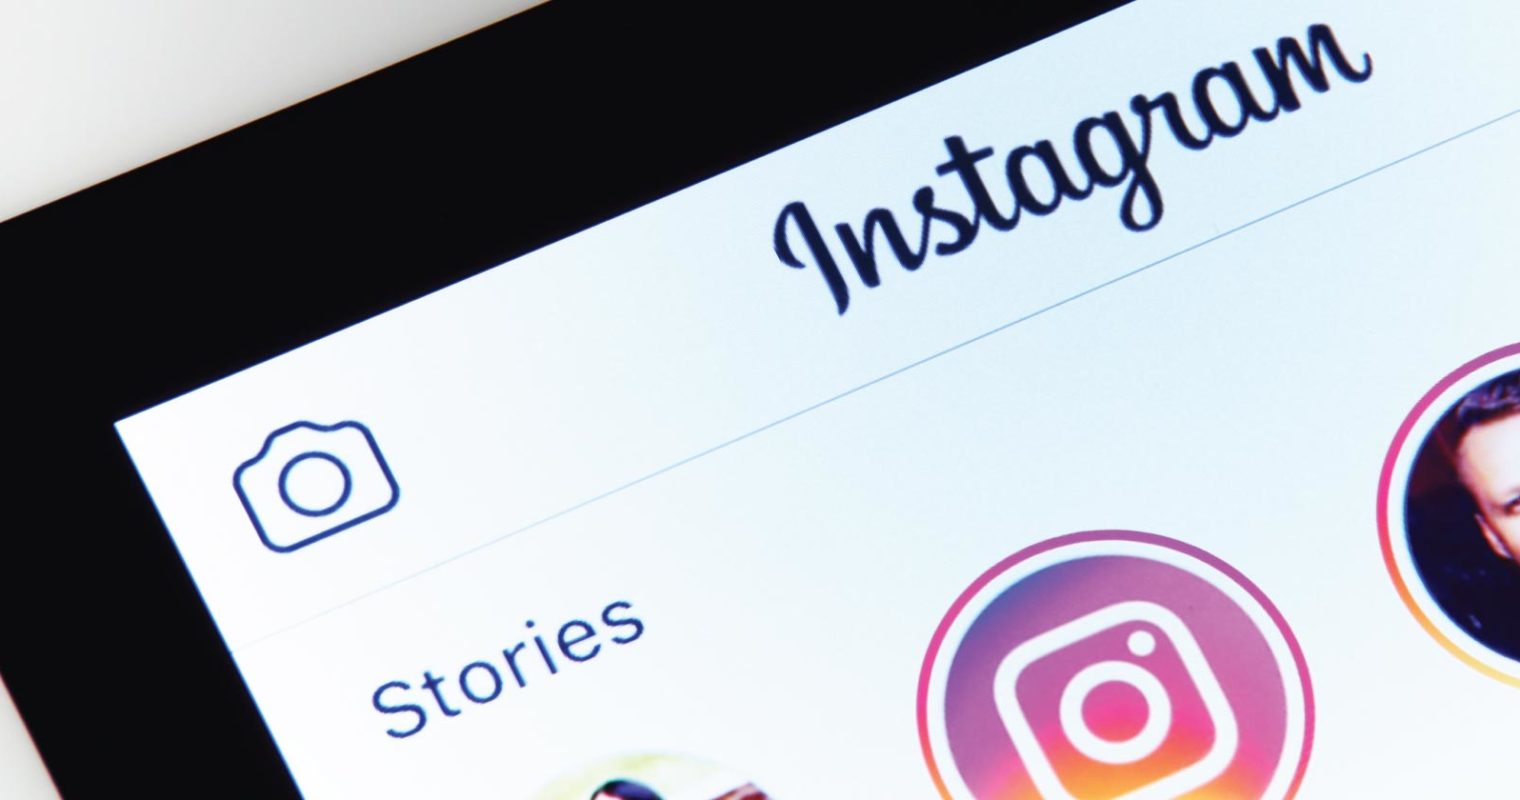 How to See More of What You Want on Instagram?